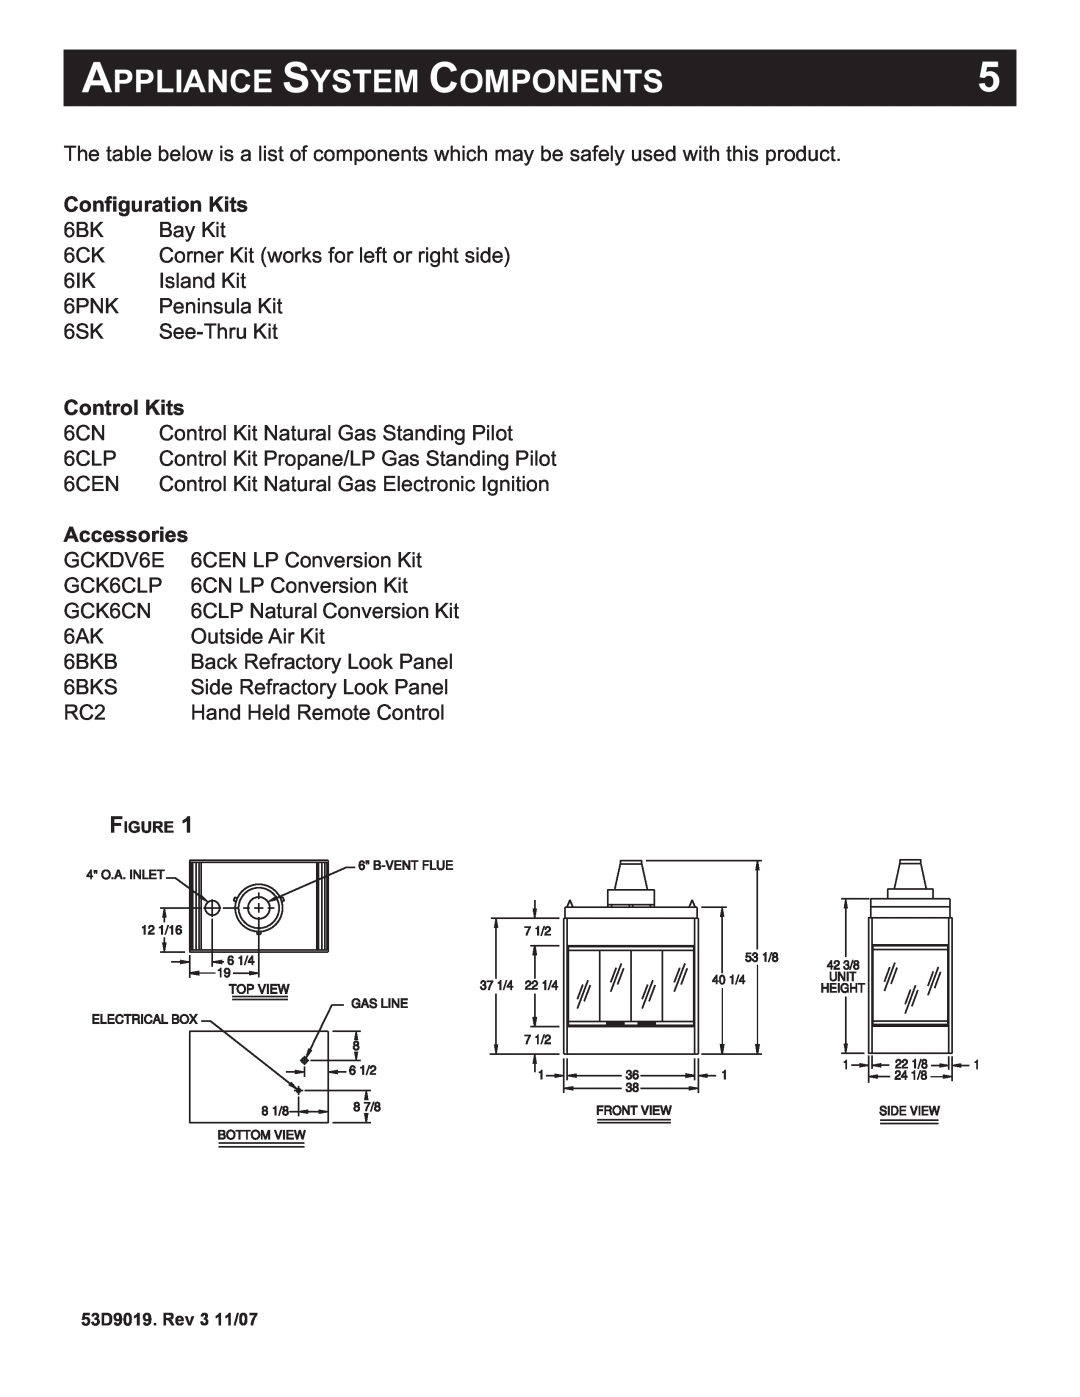 Monessen Hearth DESIGNER SERIES manual Appliance System Components, Configuration Kits, Control Kits, Accessories 